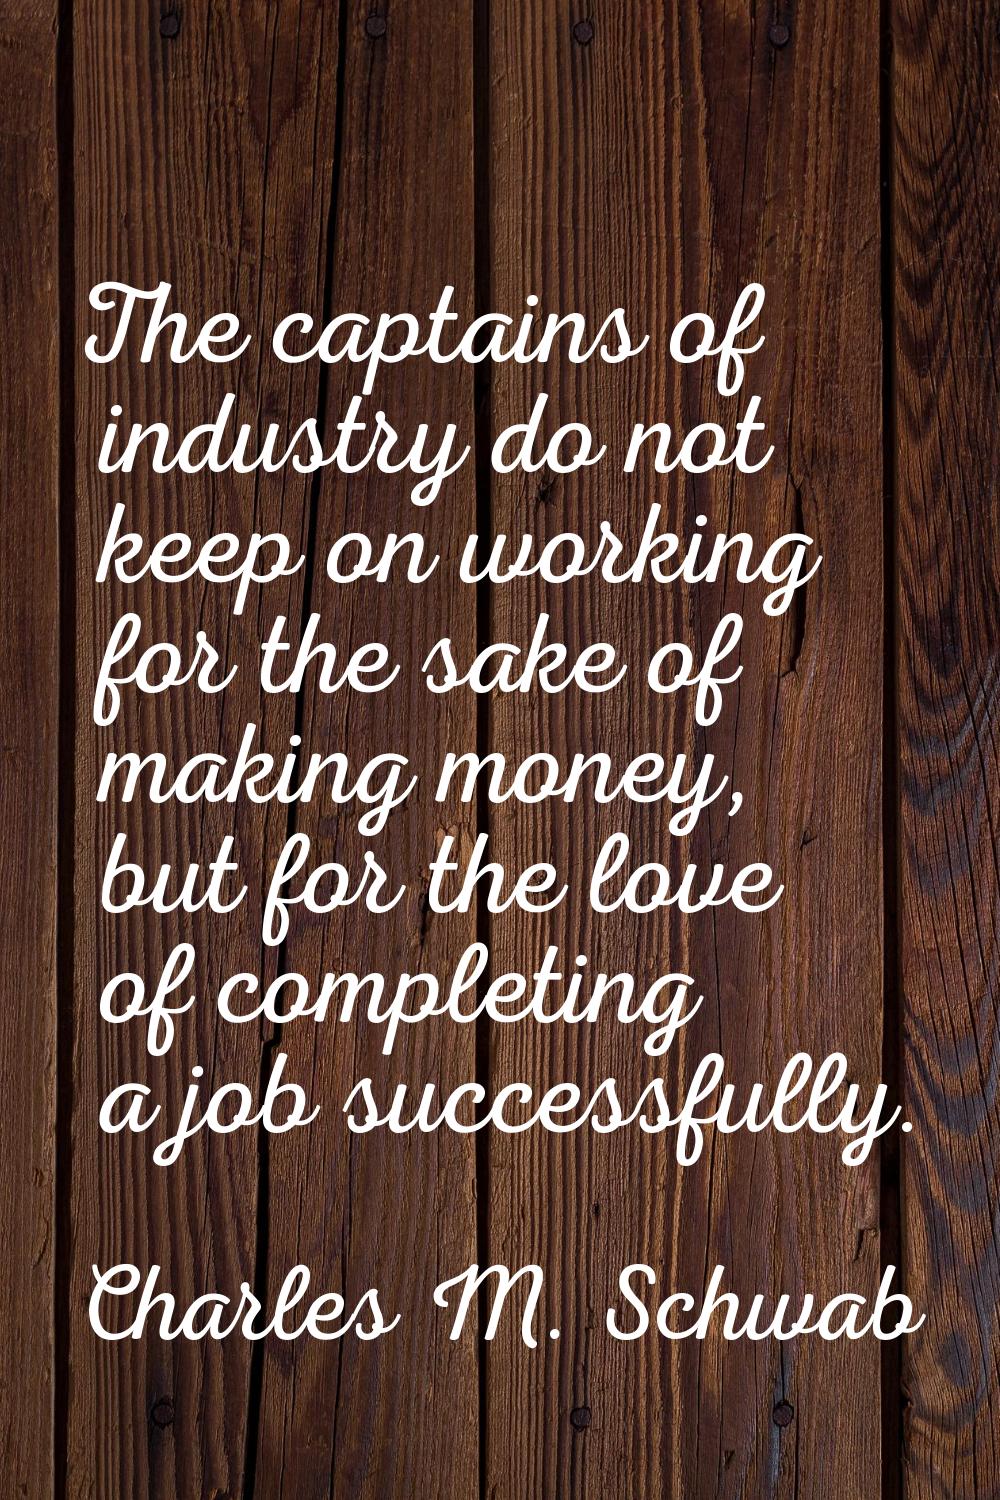 The captains of industry do not keep on working for the sake of making money, but for the love of c